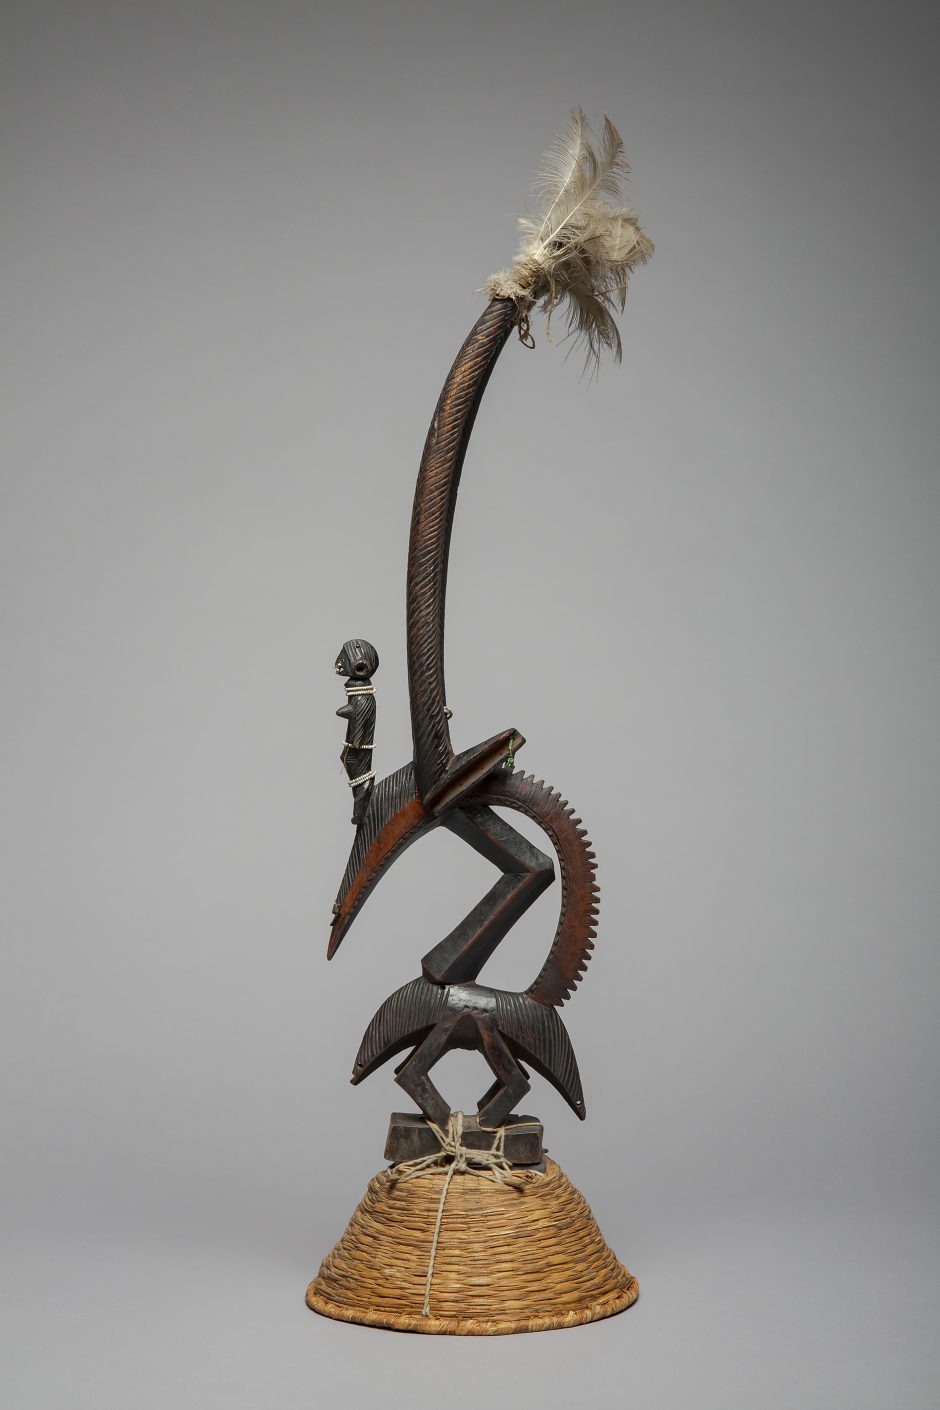 Standing figure, wood, plant fiber braid, feathers, before 1908